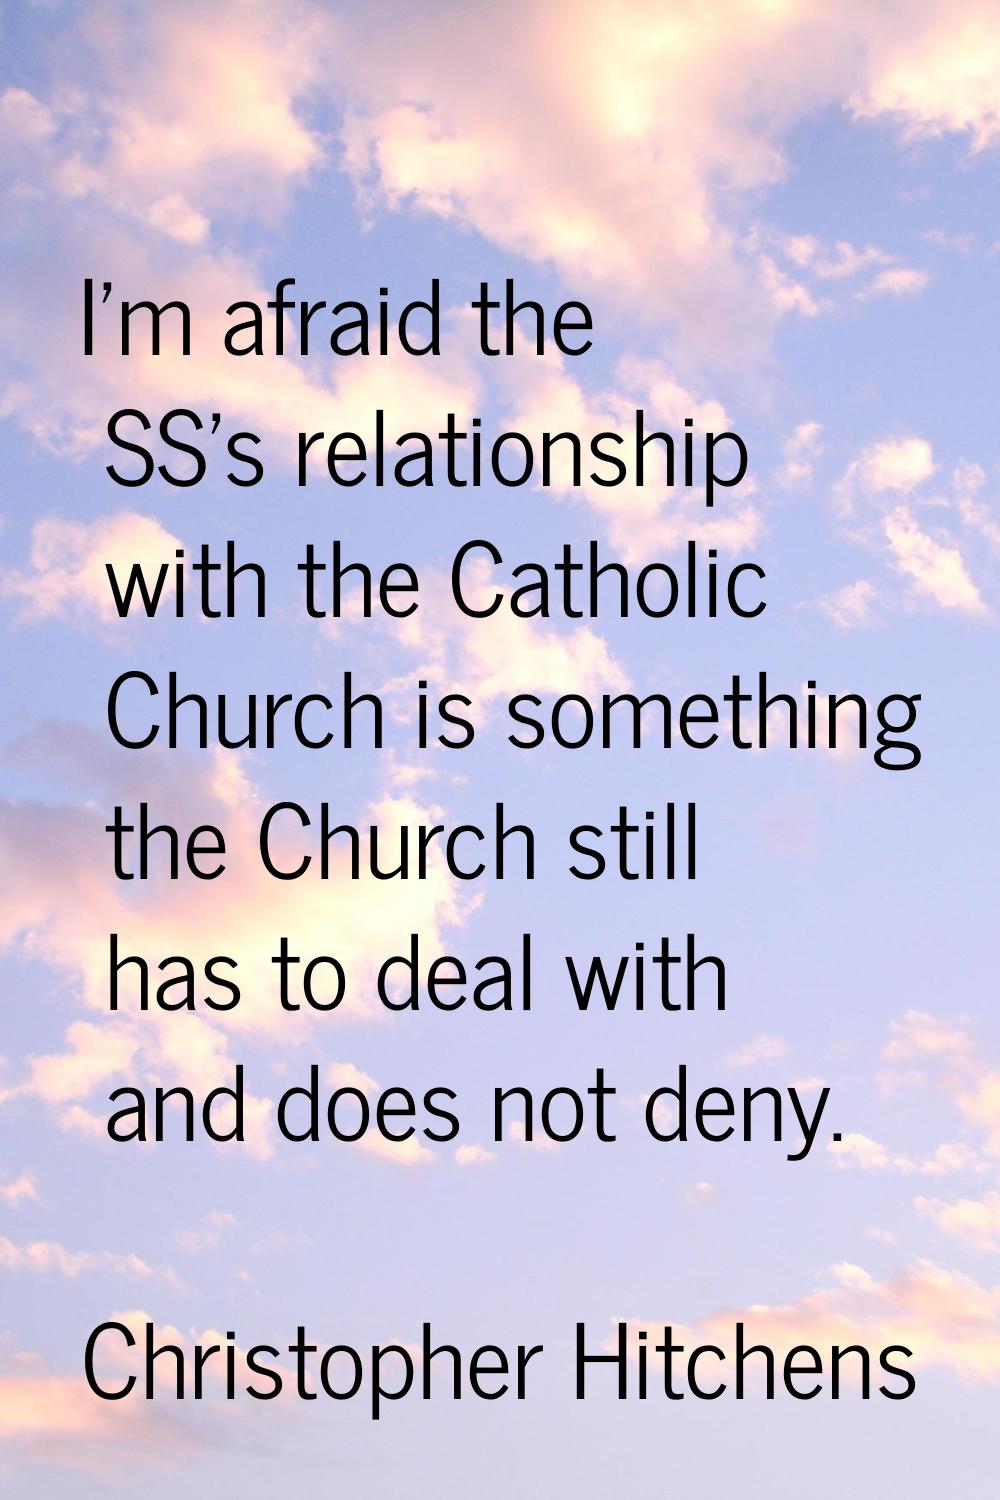 I'm afraid the SS's relationship with the Catholic Church is something the Church still has to deal